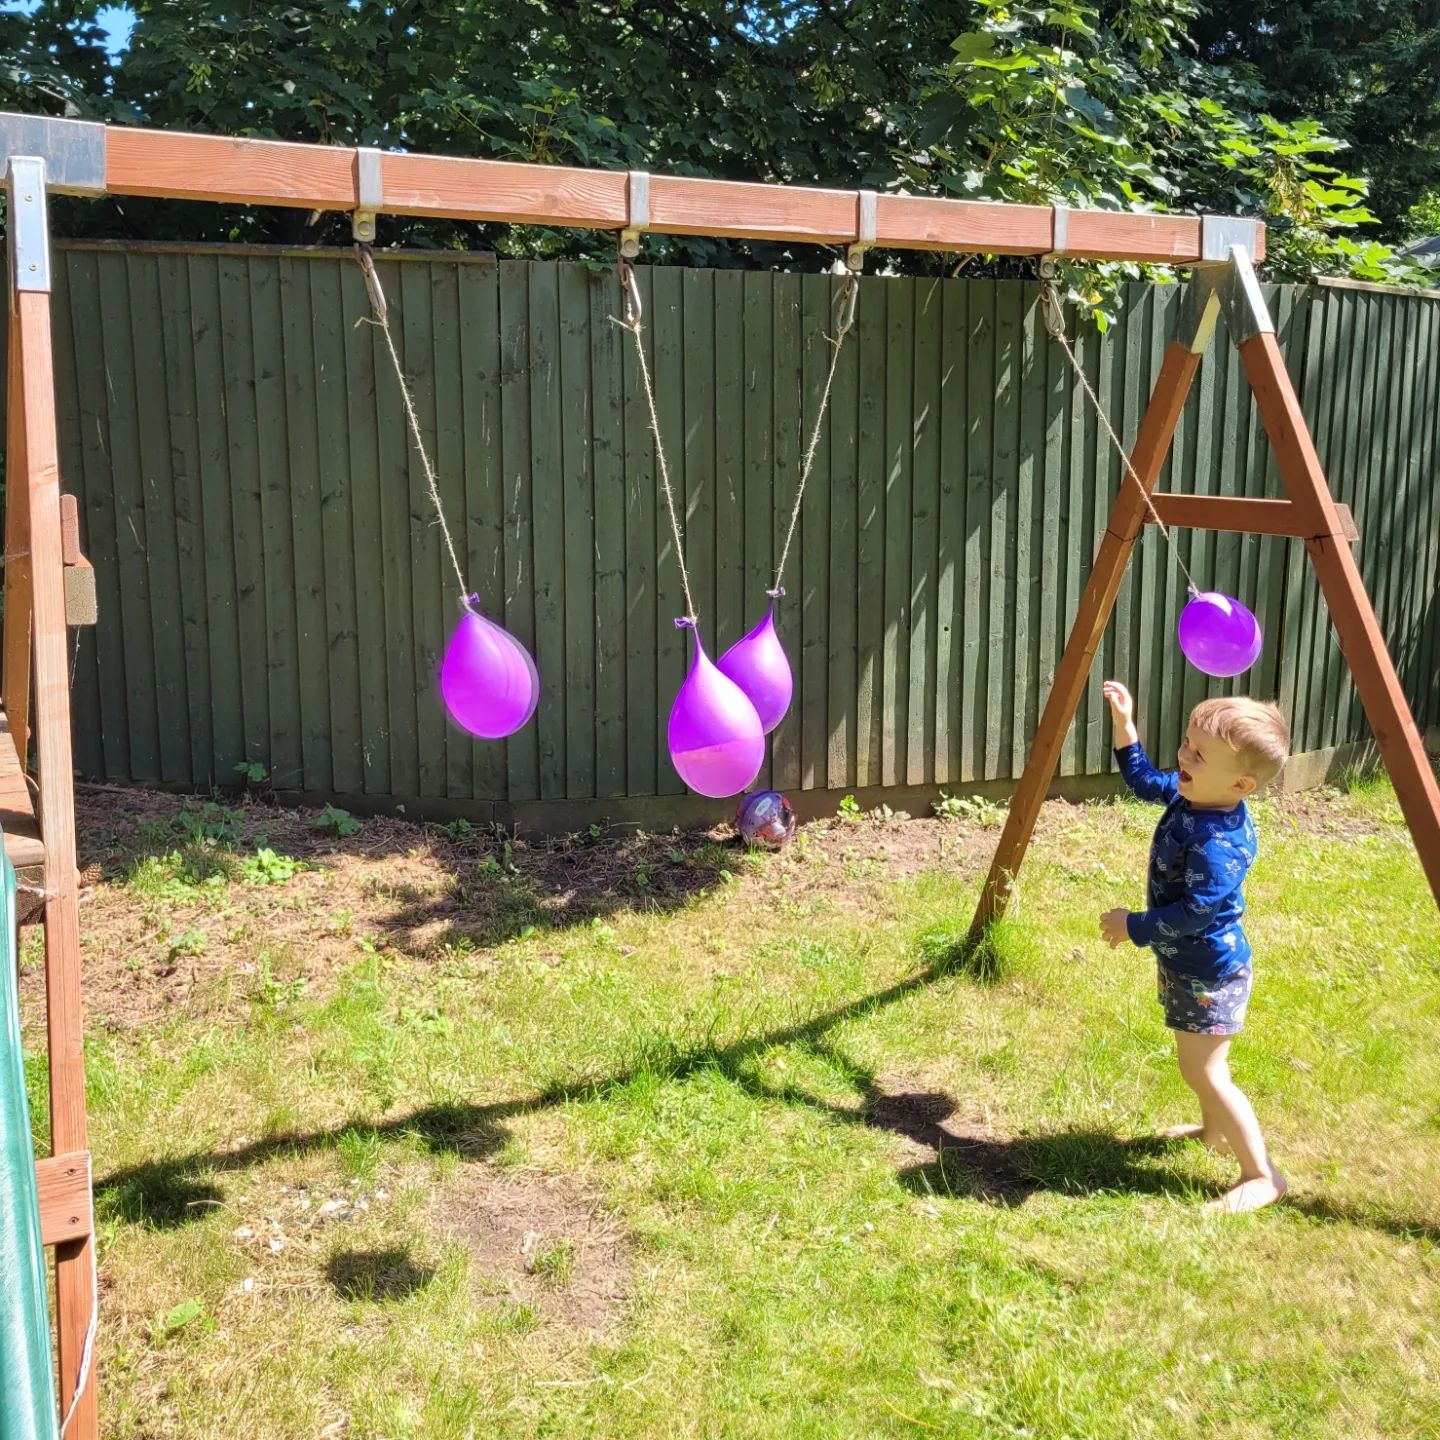 Hanging water balloons from backyard play structure. Photo by Instagram user @jam_potatoes